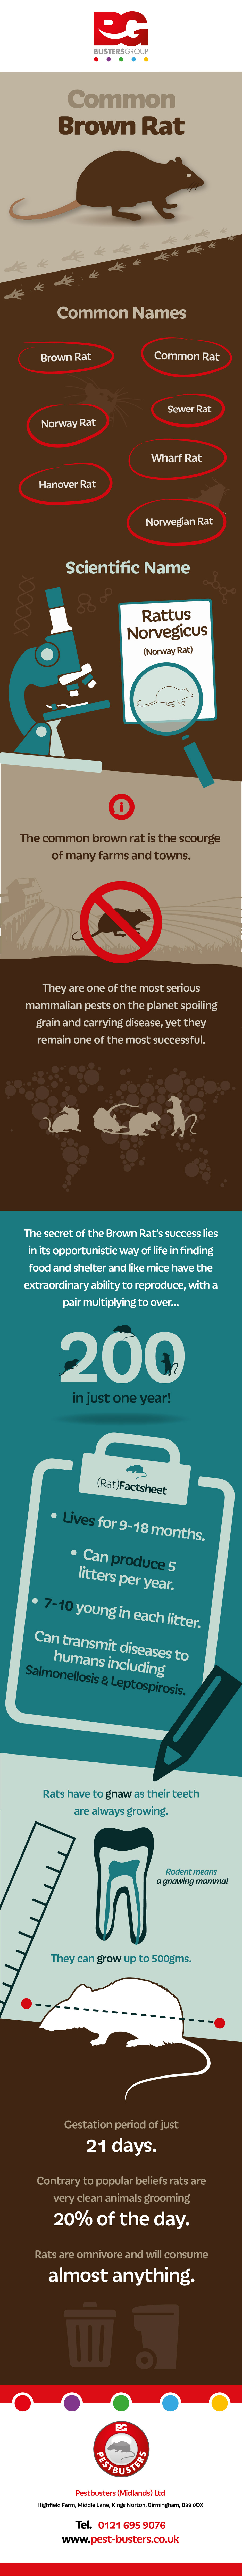 Common-Brown-Rat-Facts-InfoGraphic-Pestbusters